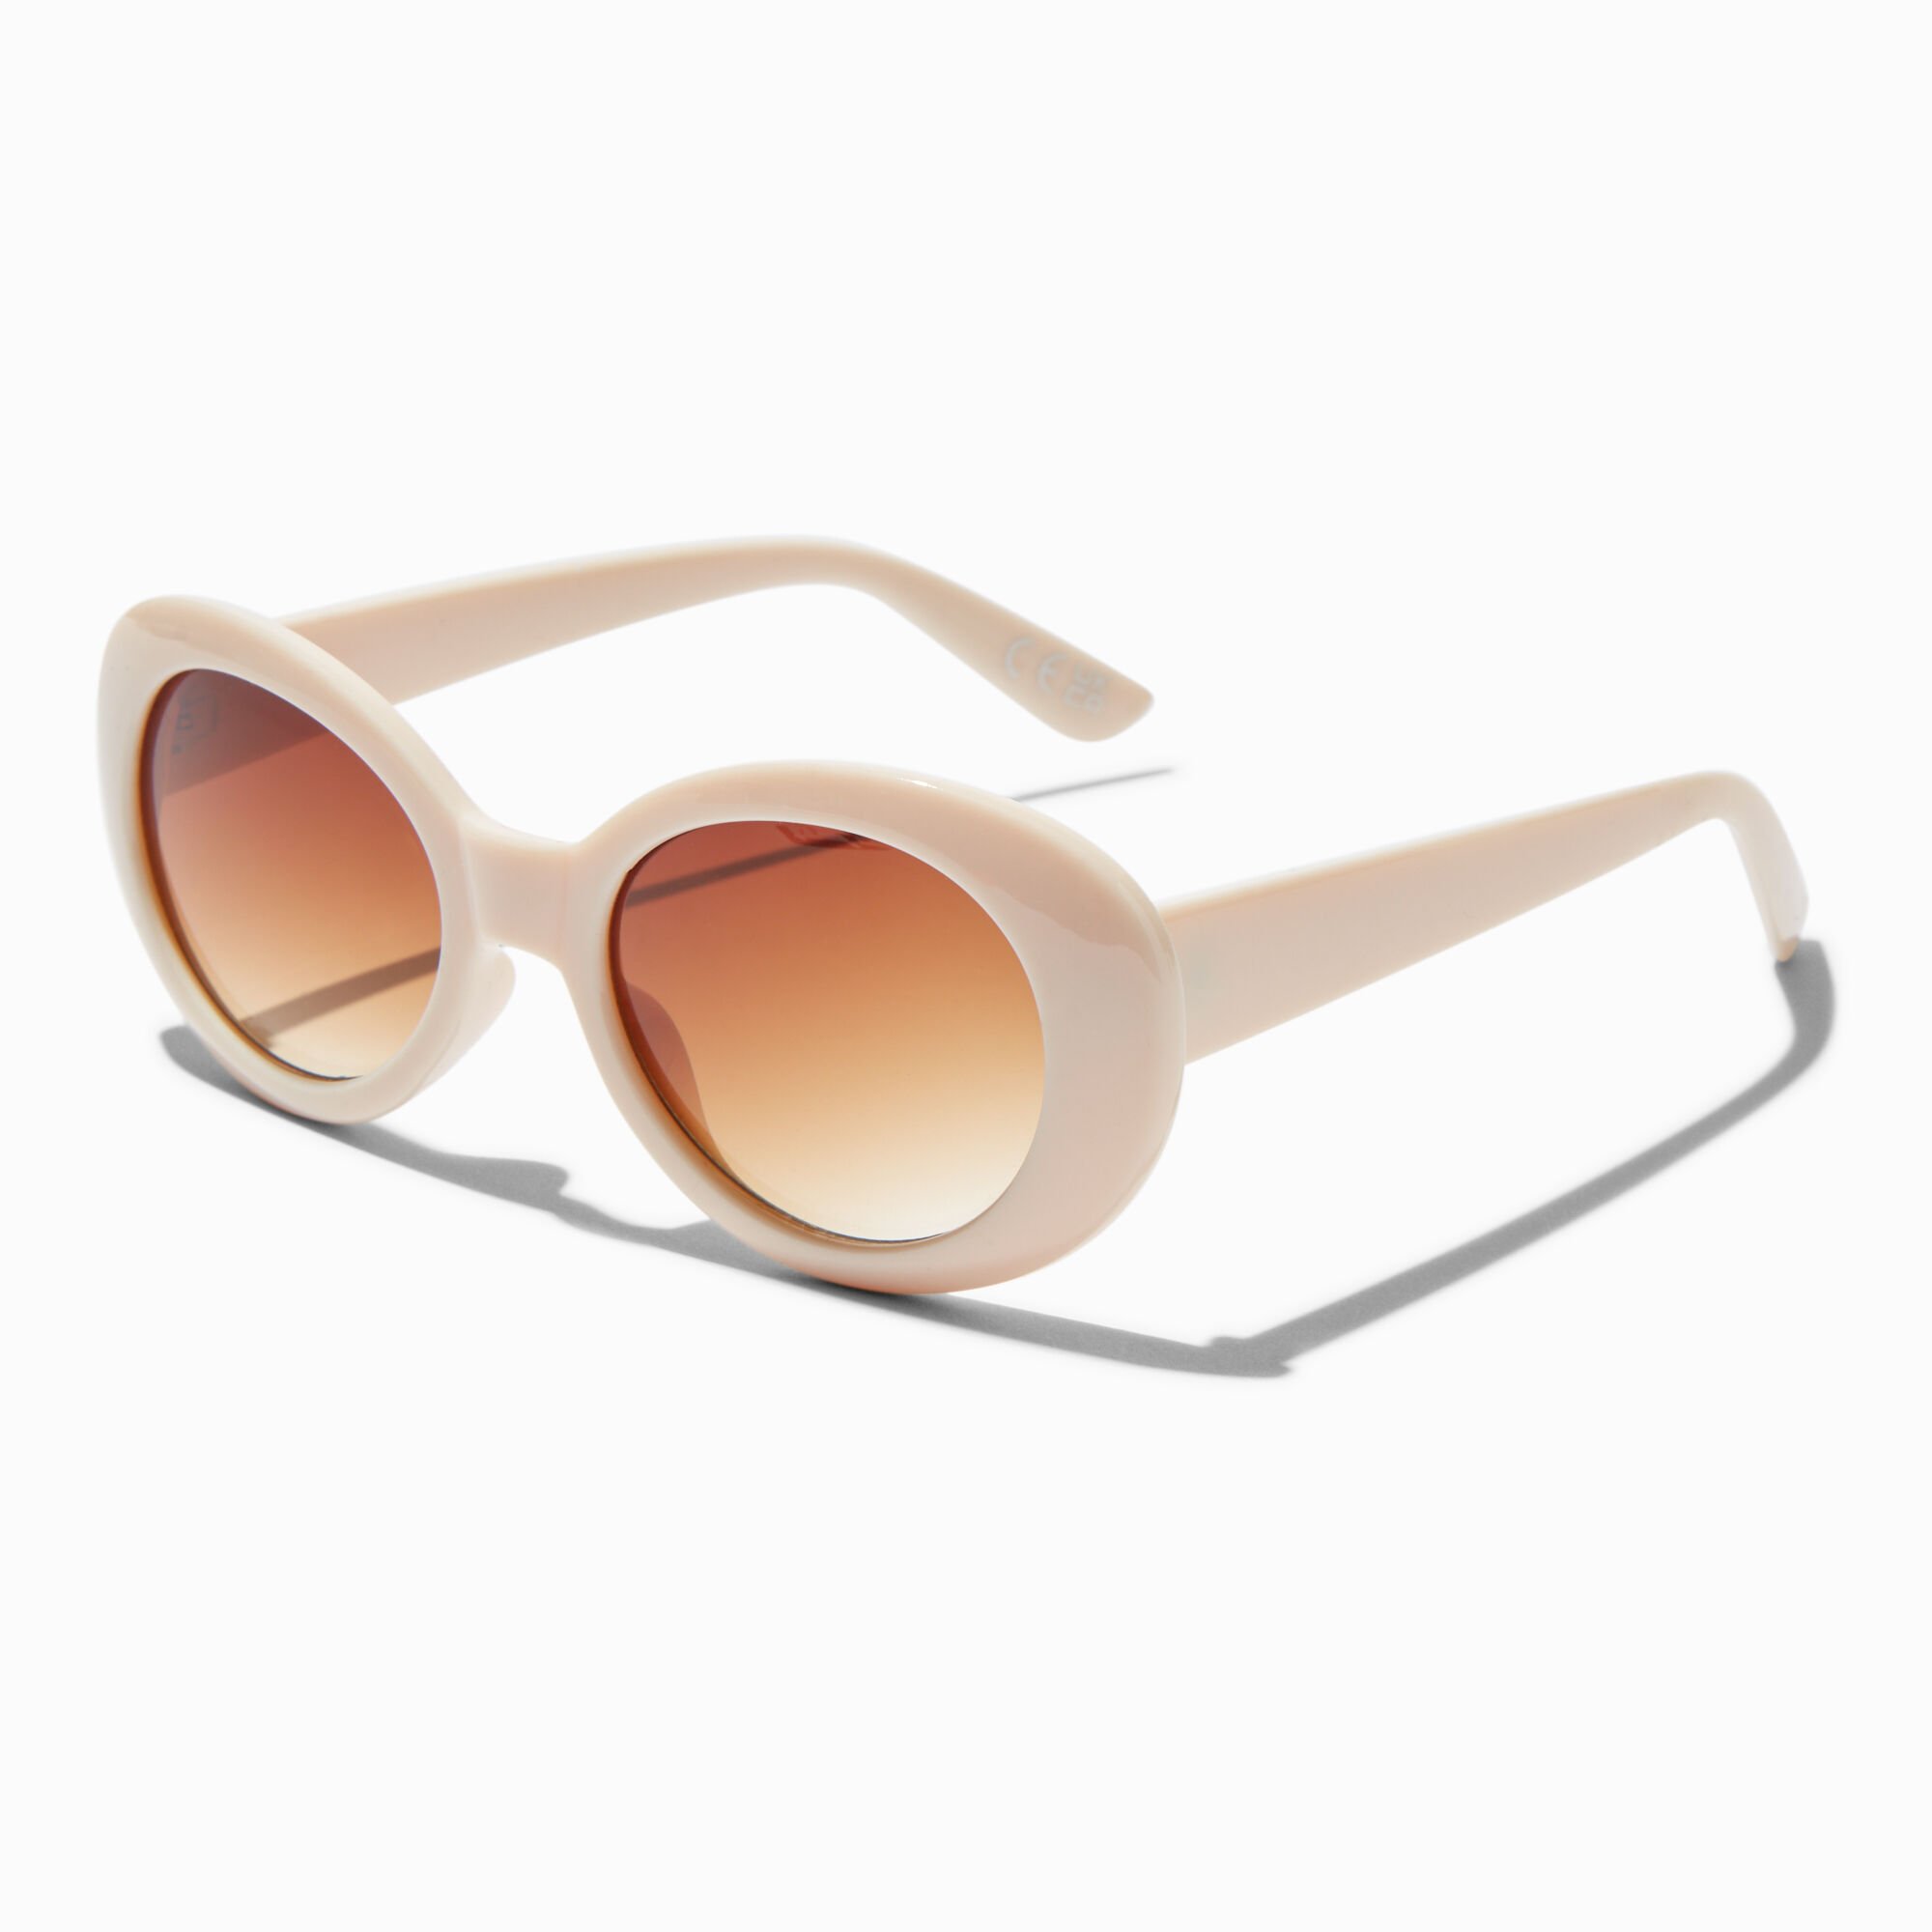 View Claires Chunky Nude Mod Sunglasses information